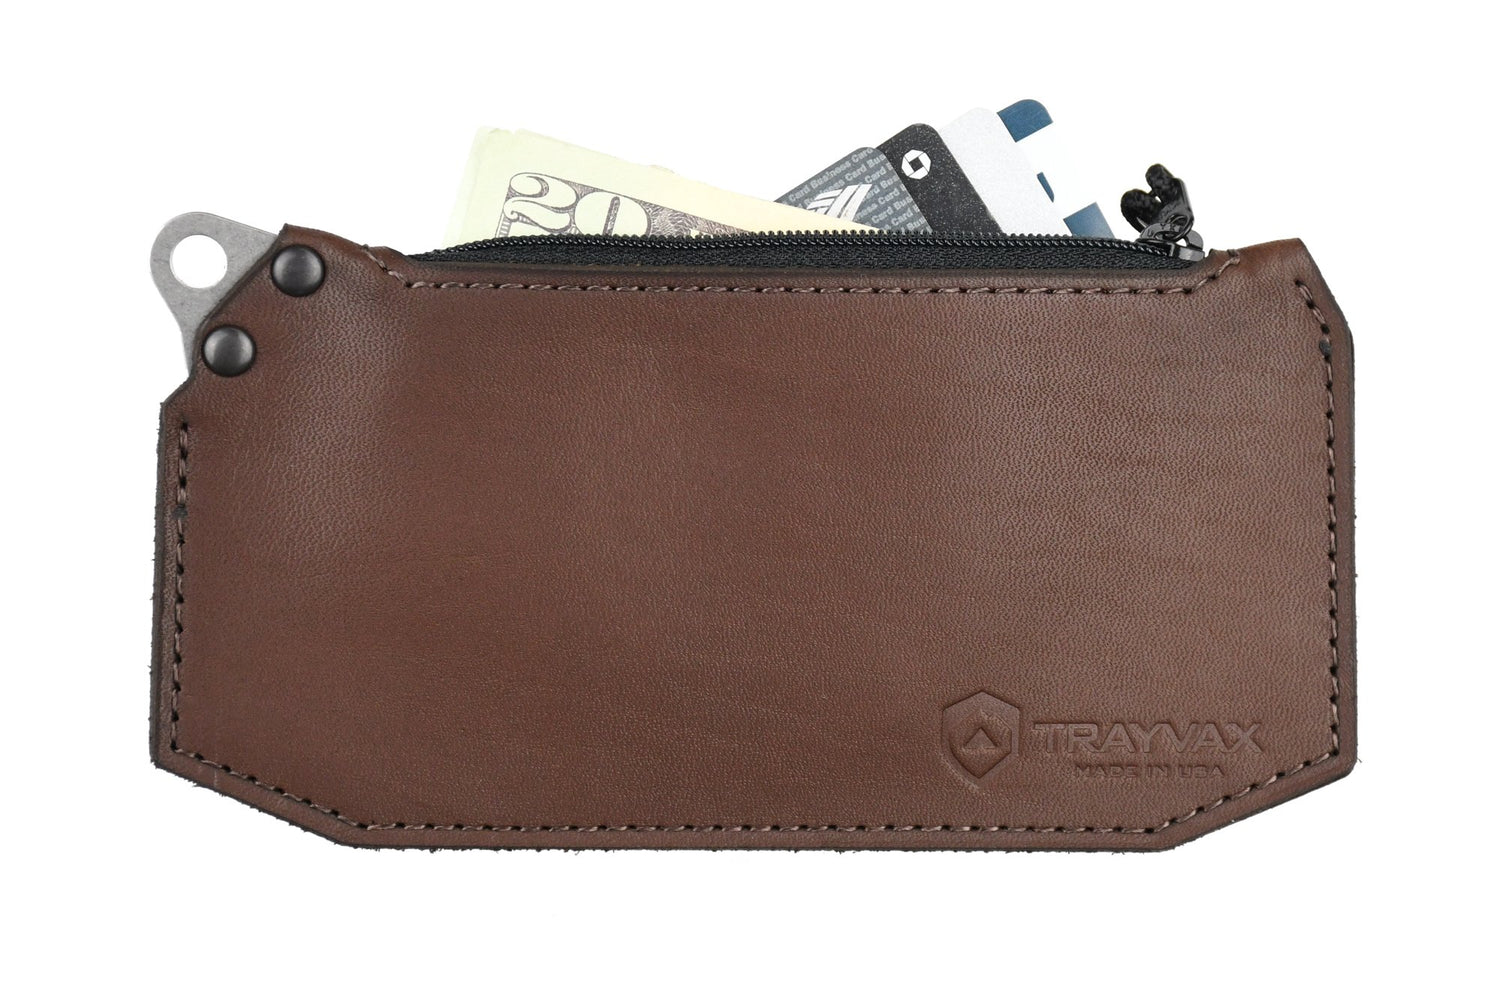 Best Front Pocket Wallets to Choose From